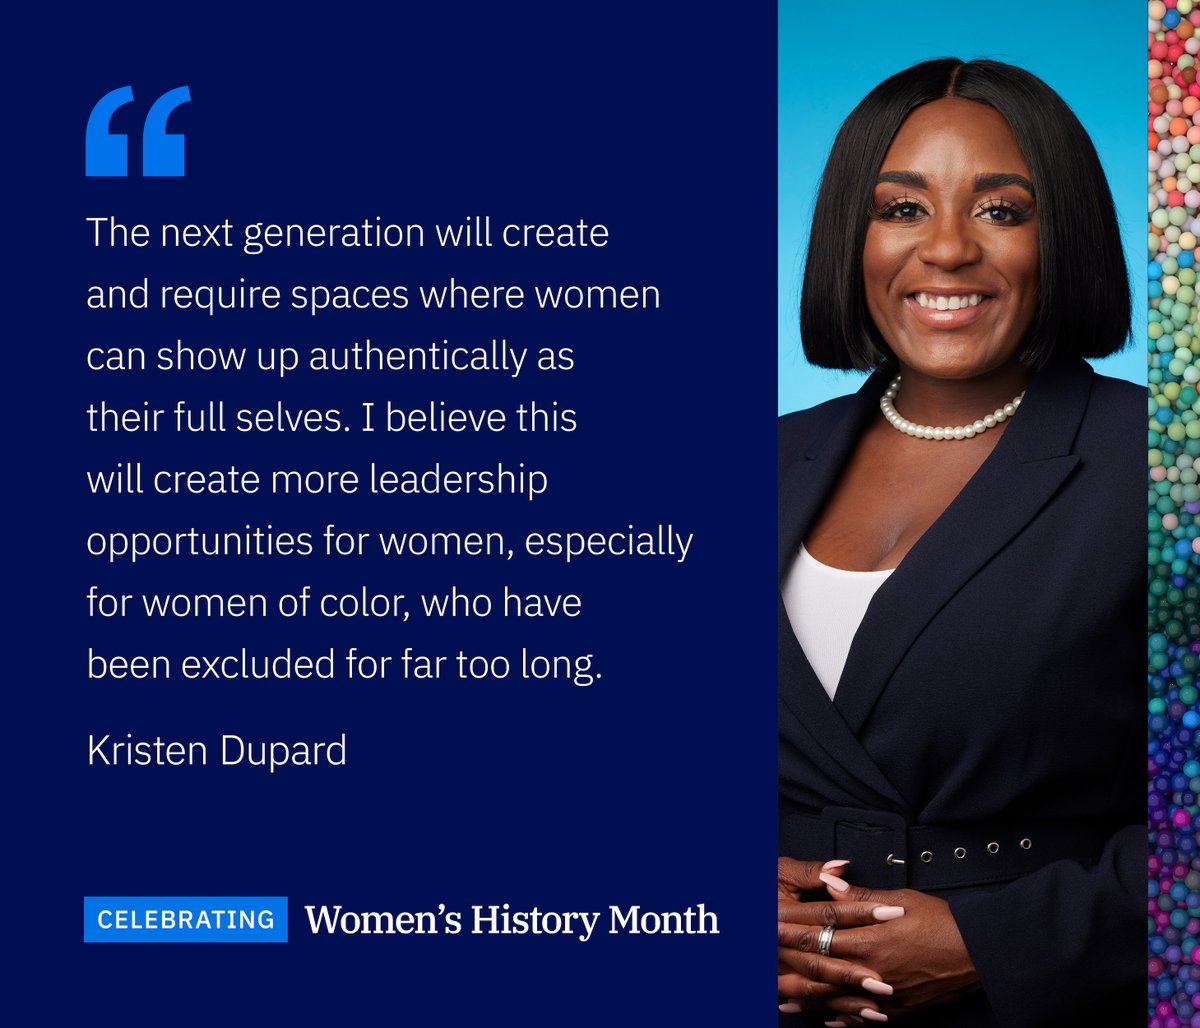 In honor of Women’s History Month, members of our Women’s Forum are sharing their personal experiences in Big Law. Kristen Dupard discusses how she believes the next generation of women will impact Big Law in this spotlight. #BigLaw #WomensHistoryMonth #WomenInLaw